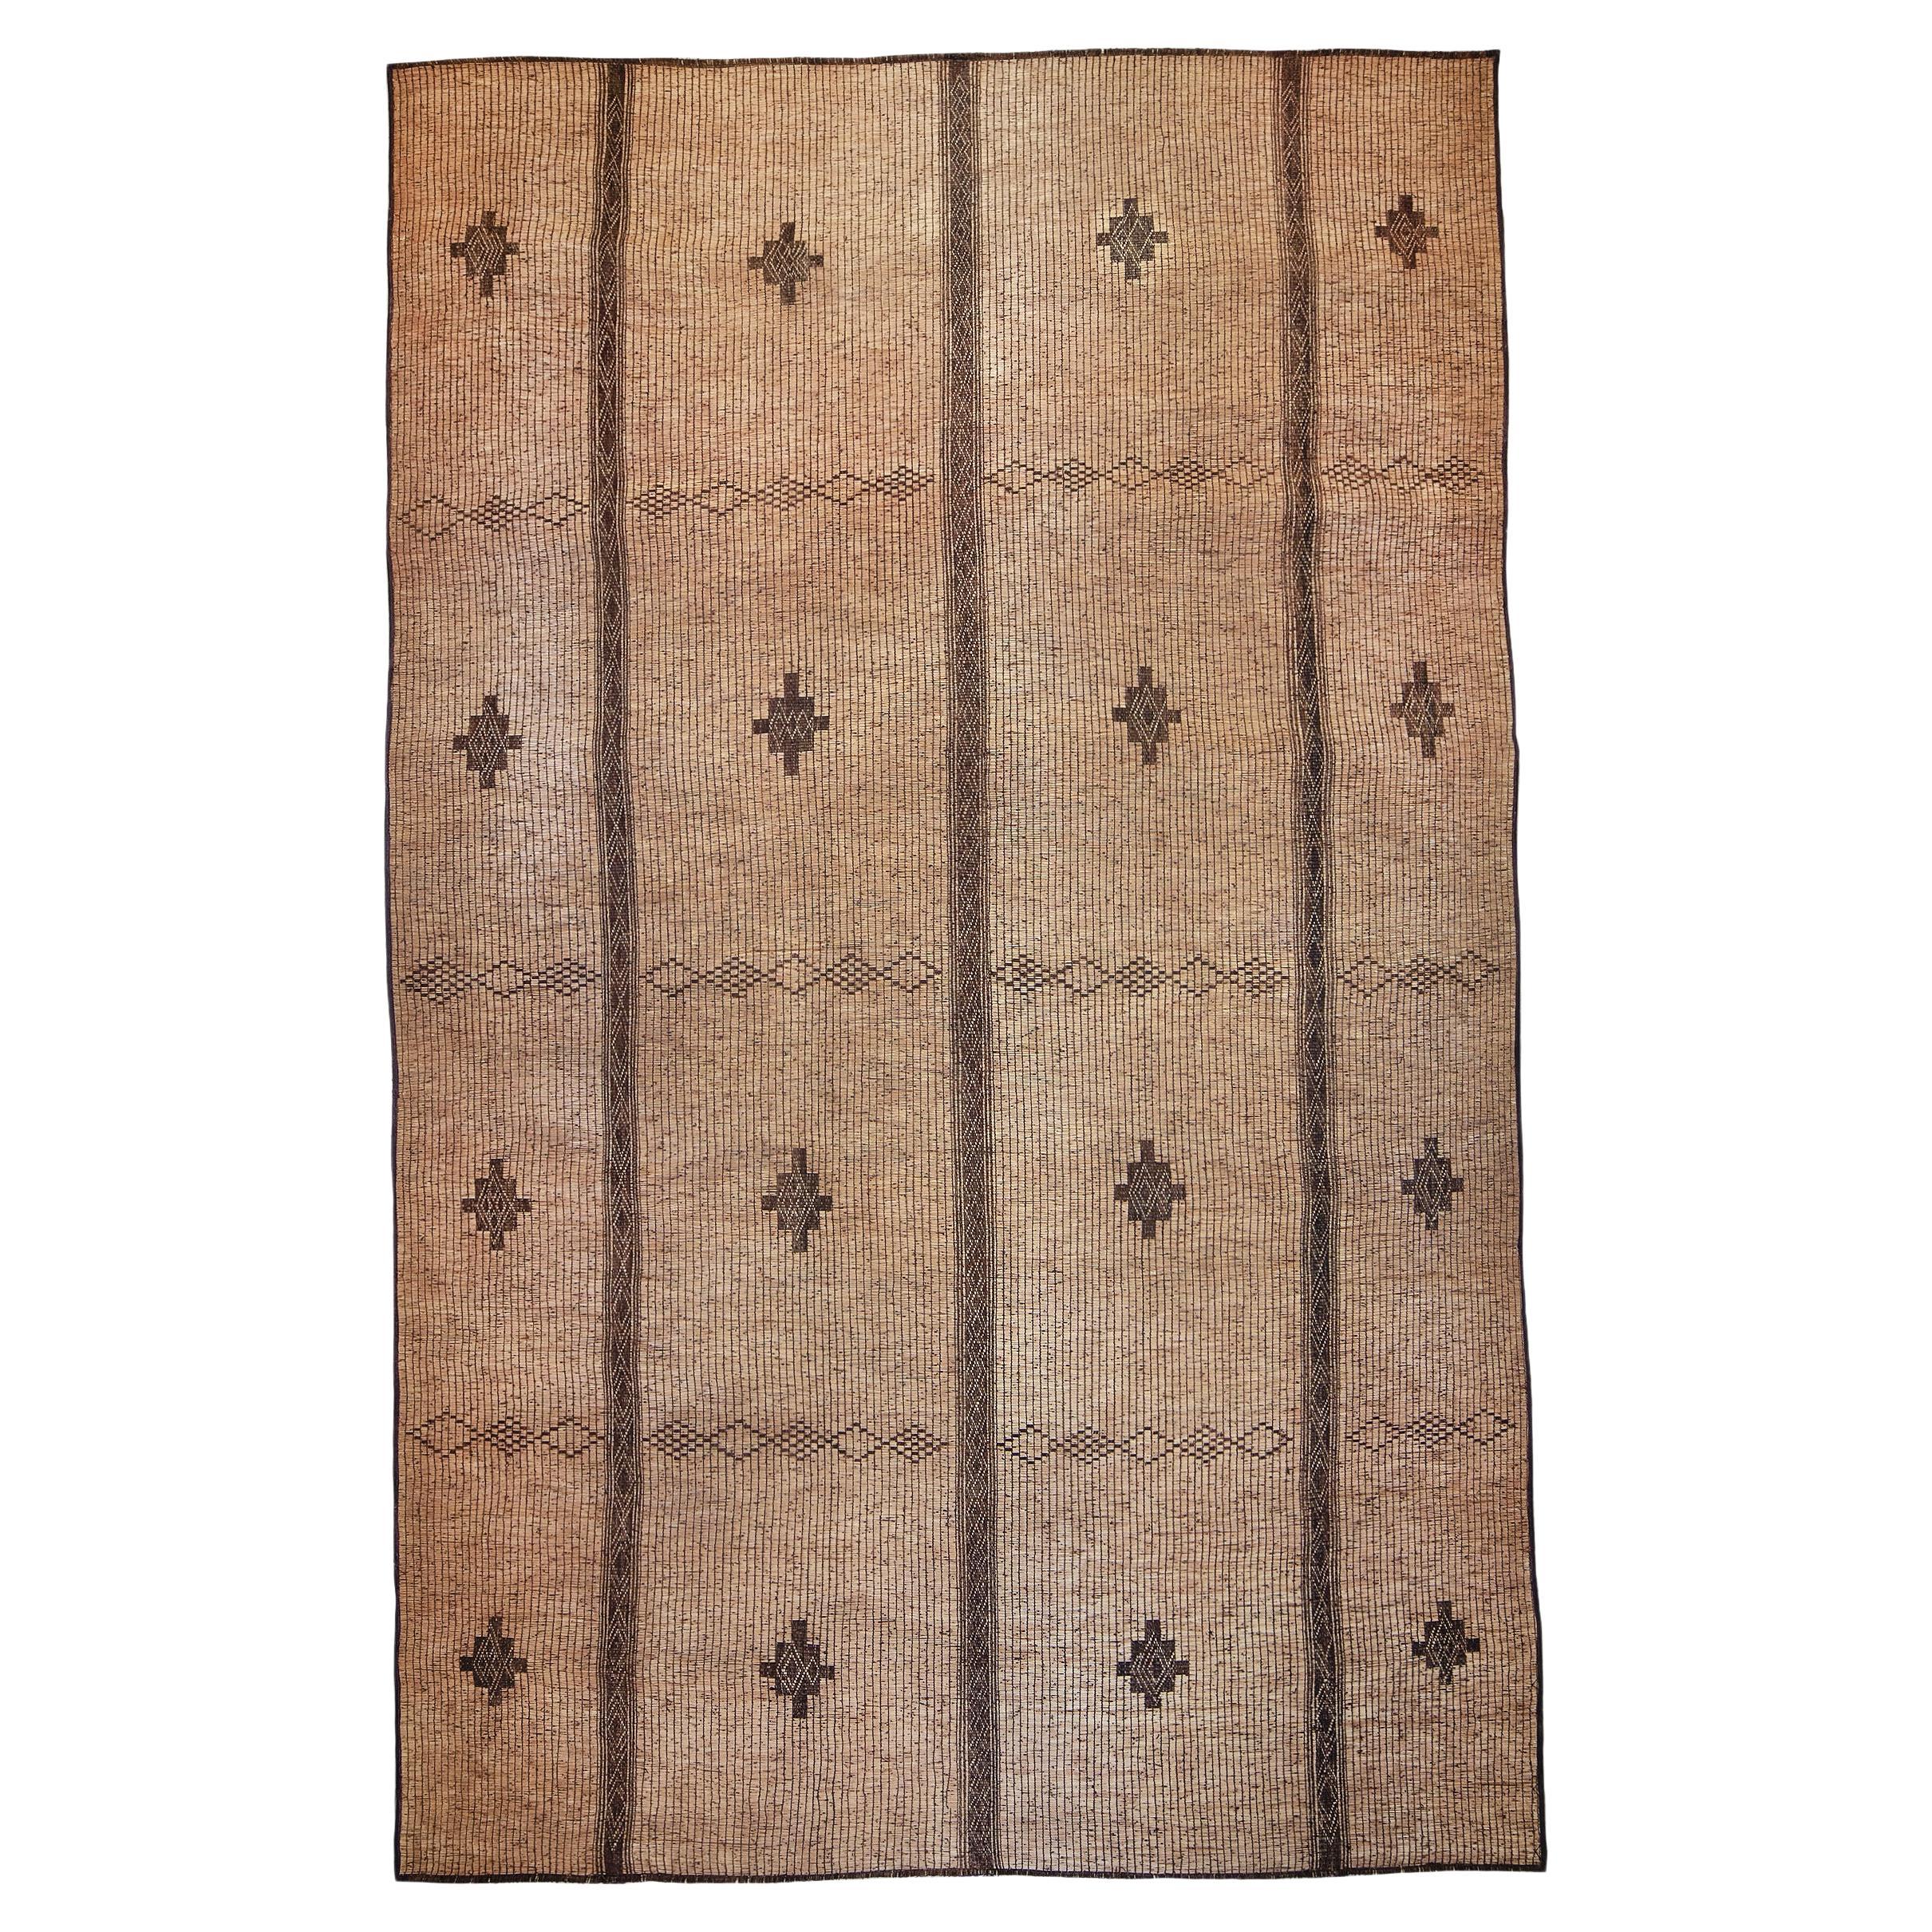 Tuareg Rug or Mat, Vintage, 20th Century, Wood and Leather, In Stock